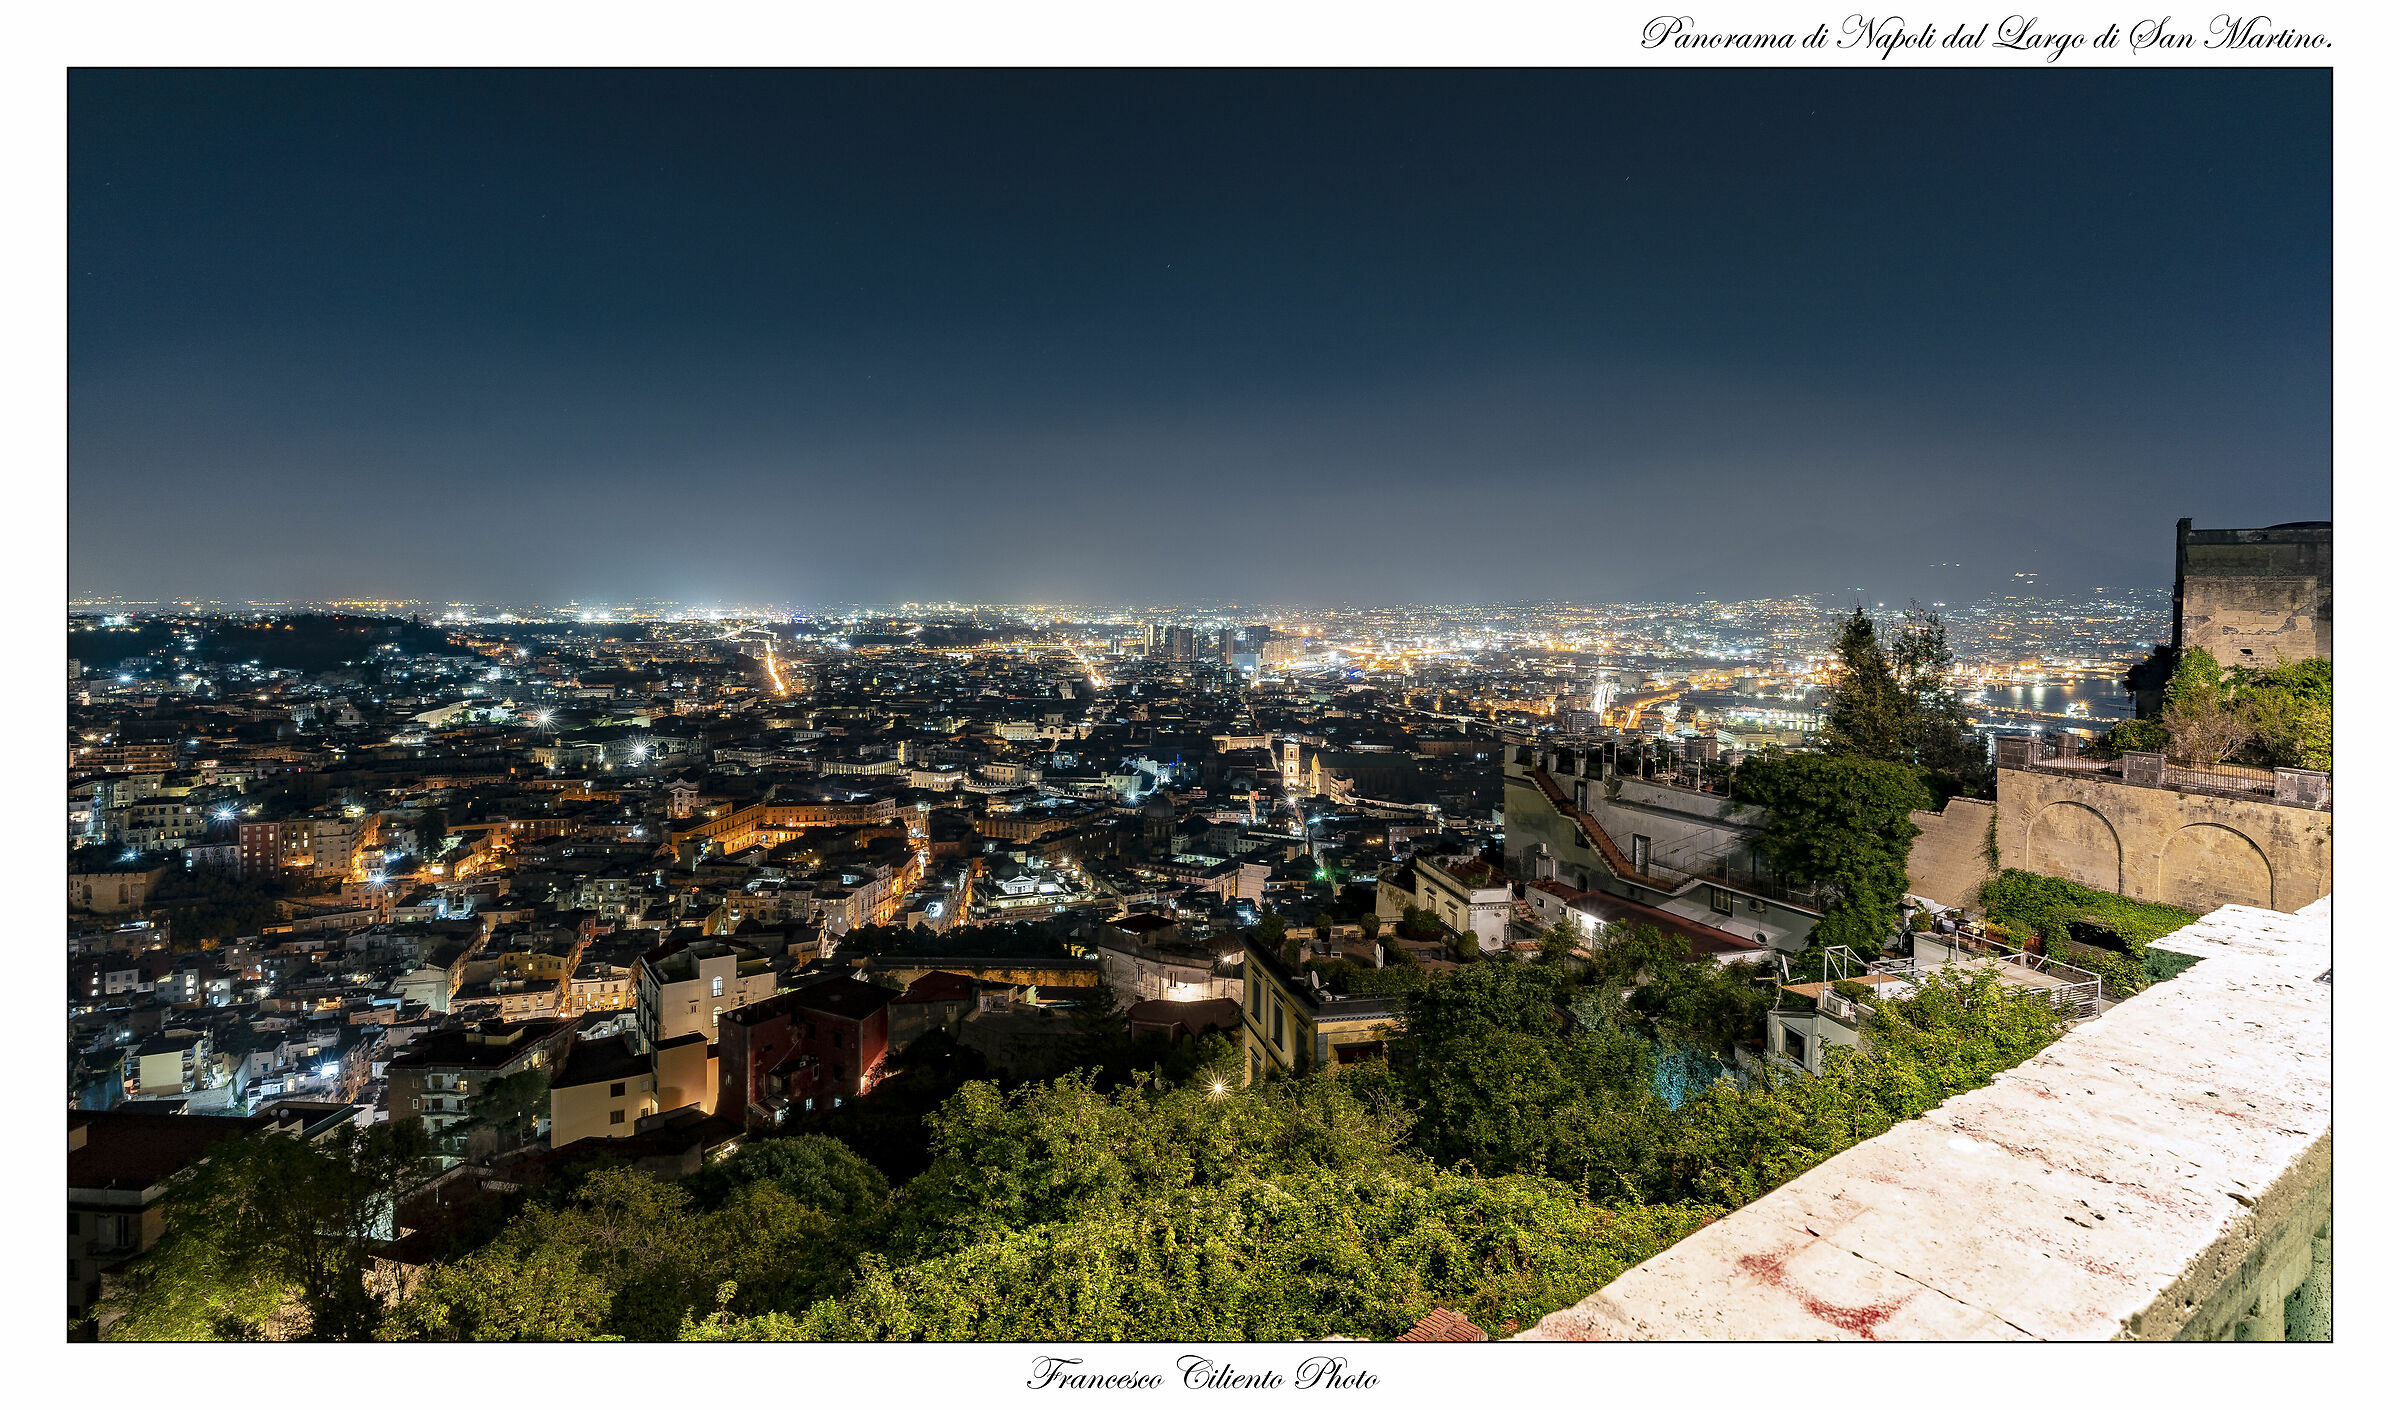 Panorama of Naples from the Largo of San Martino....